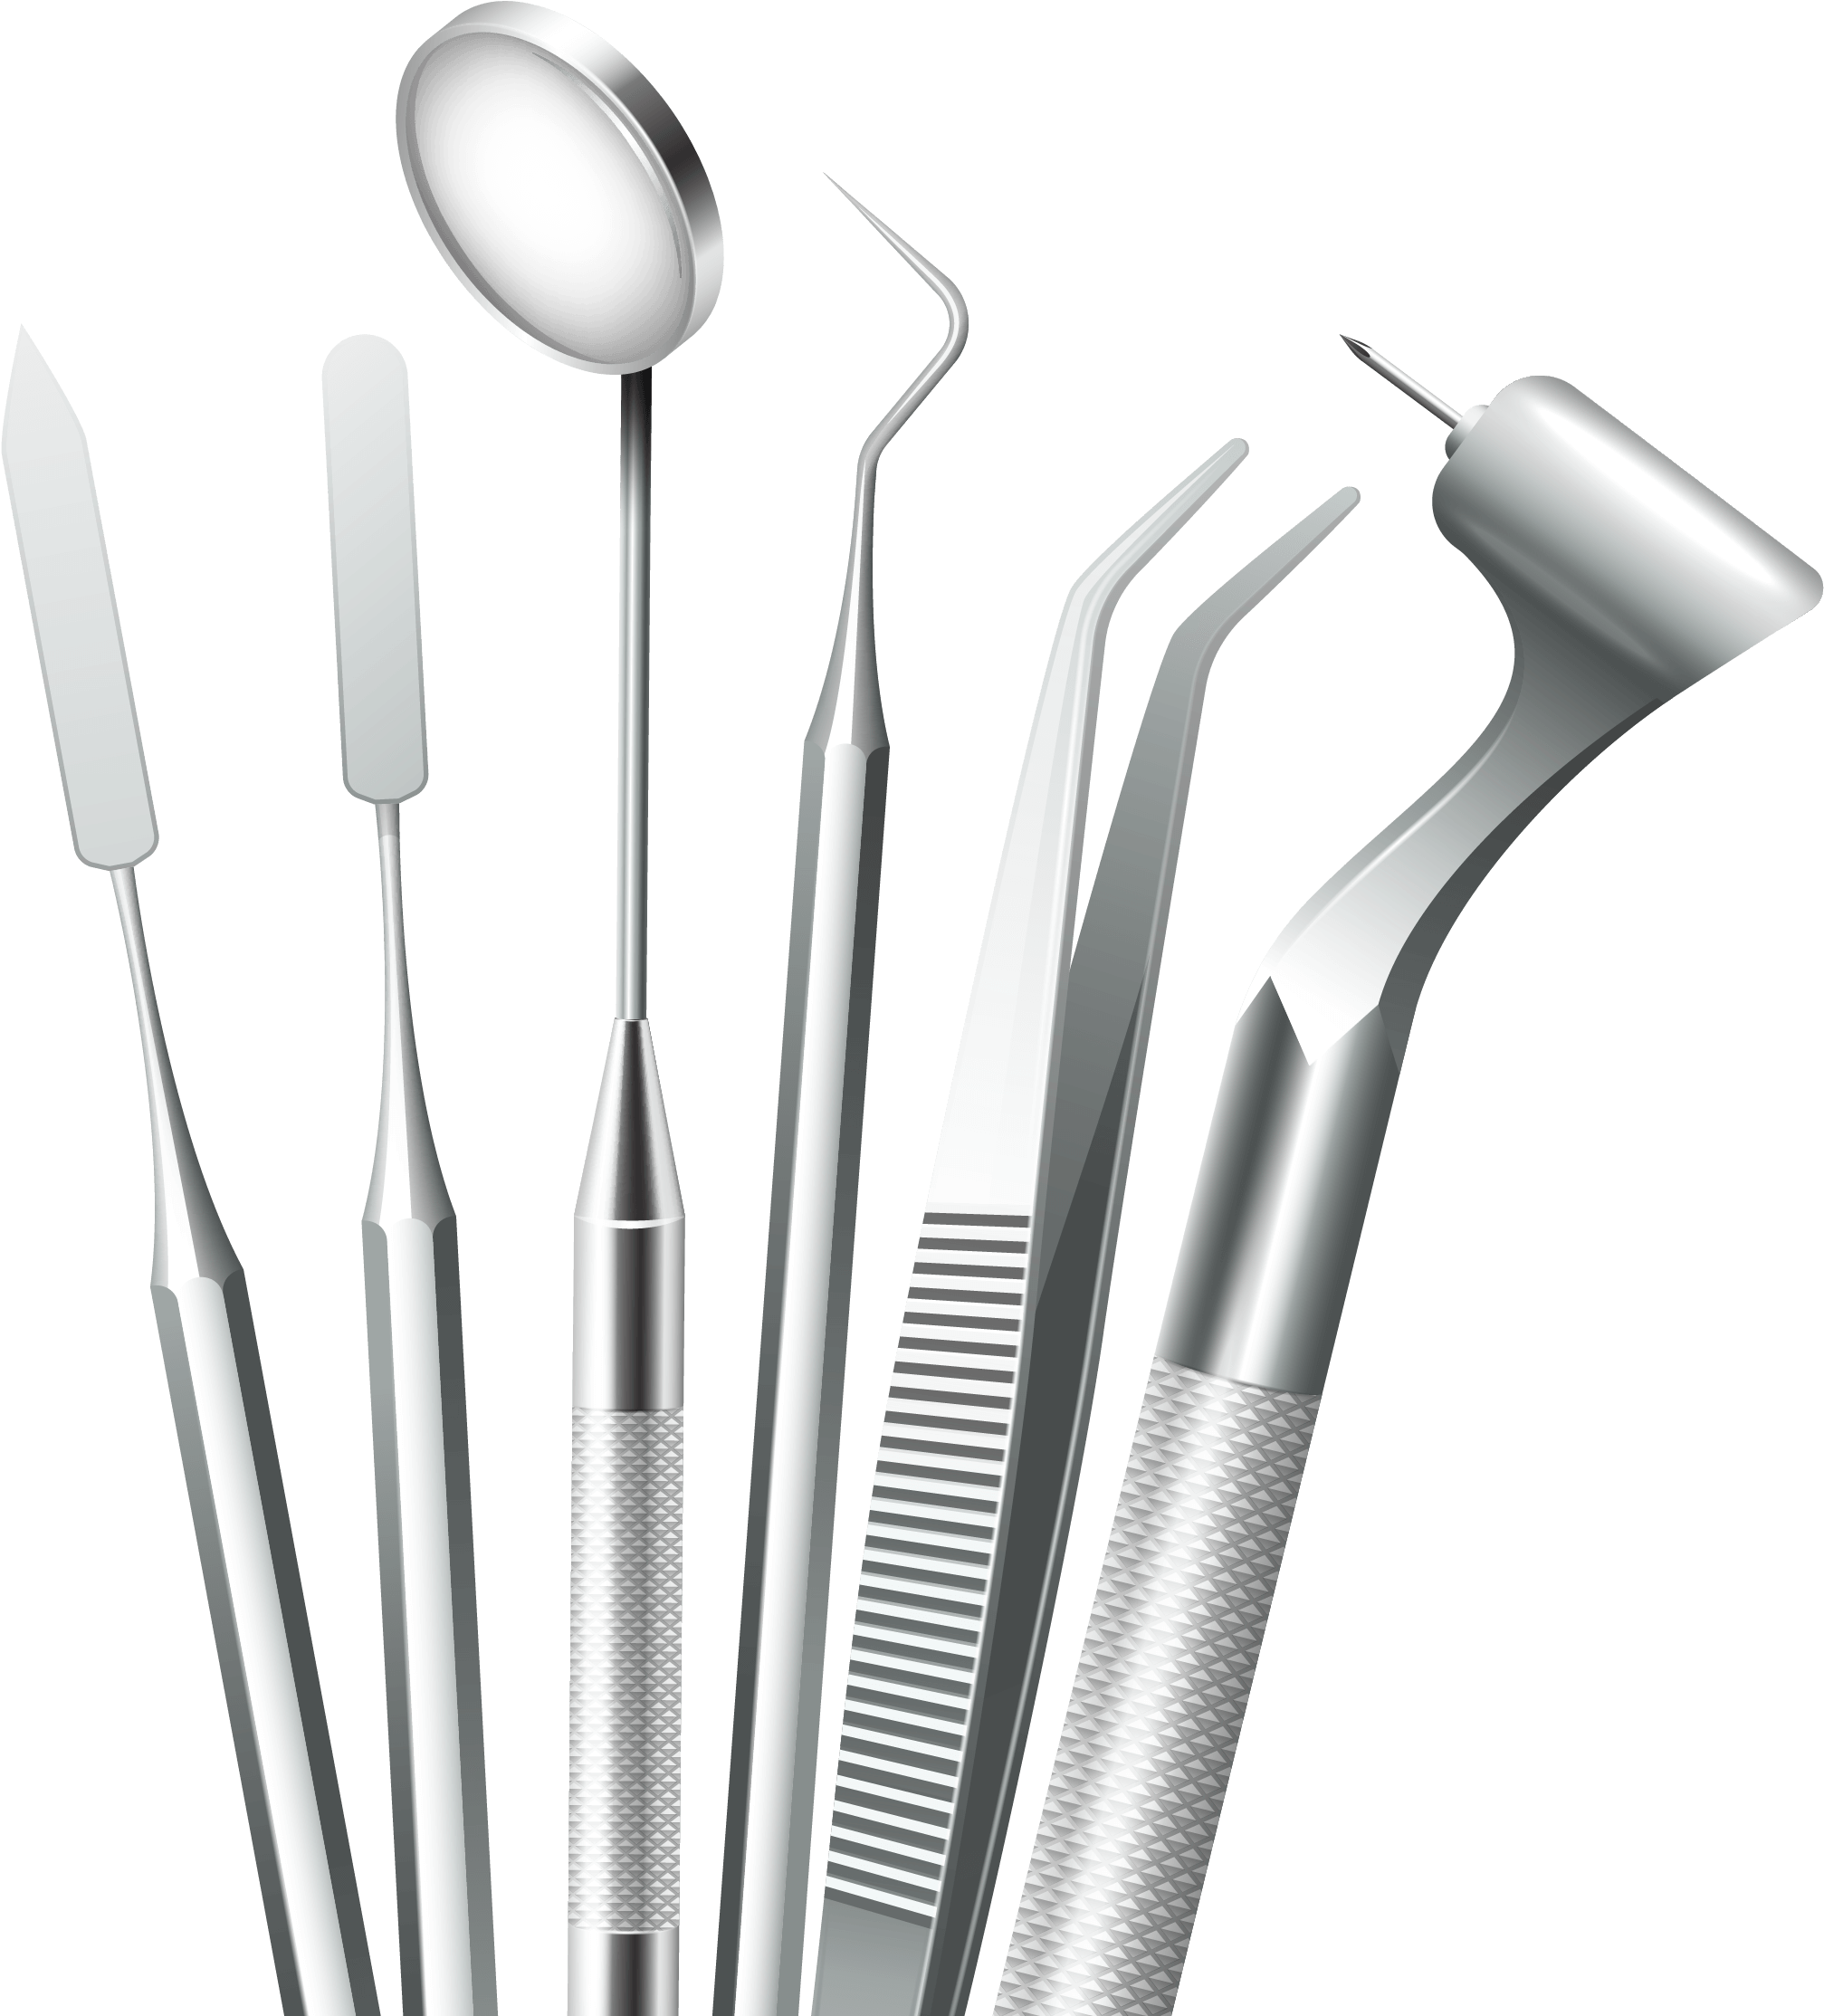 A Group Of Dental Tools